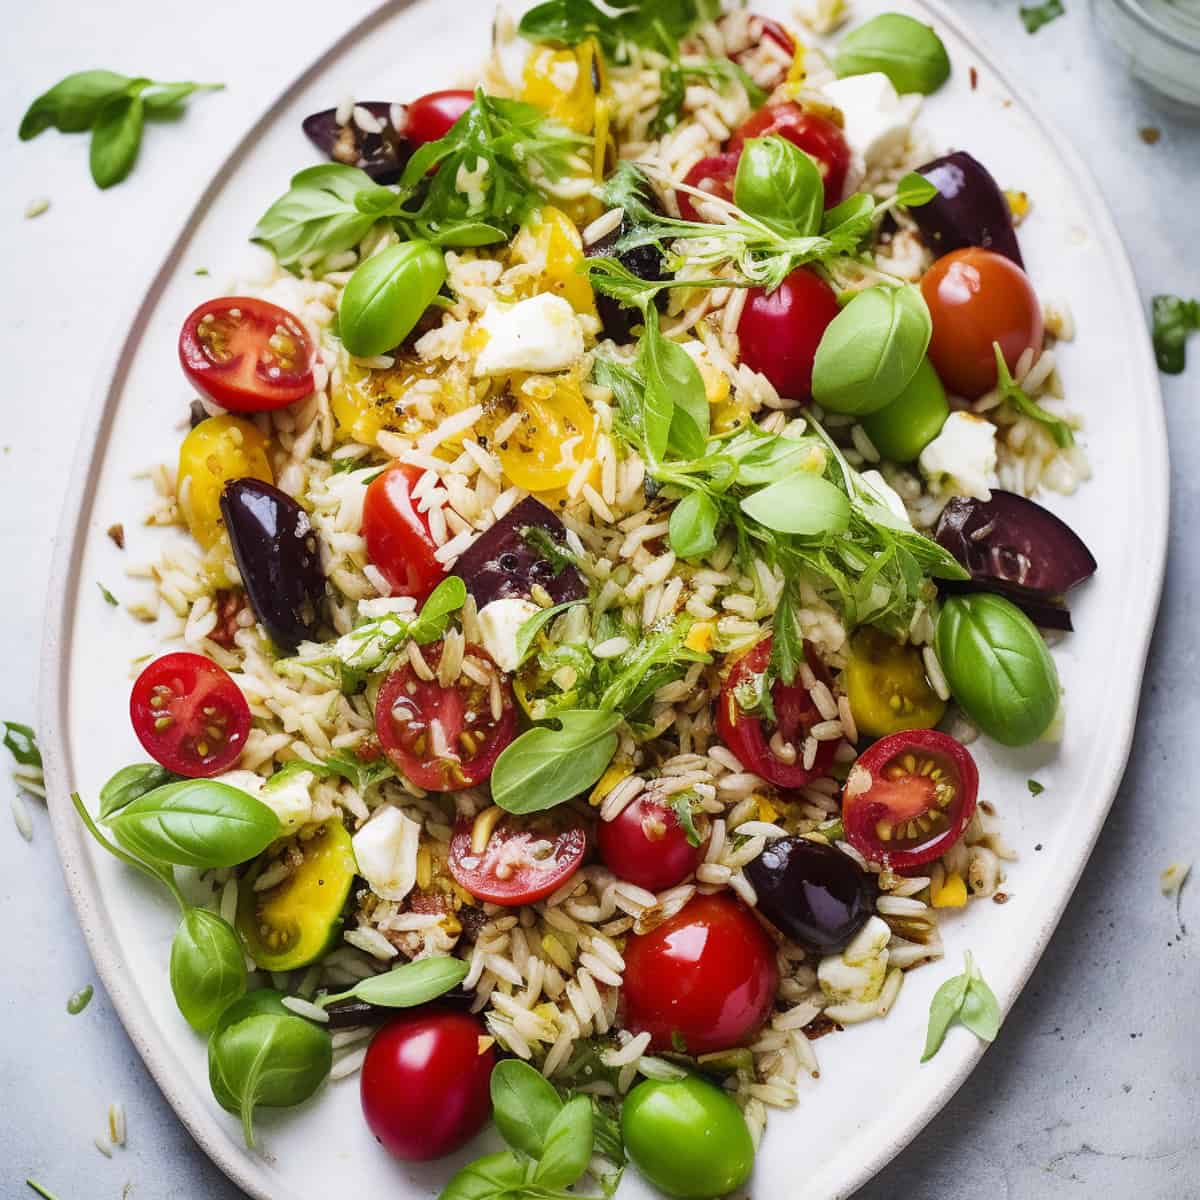 Rice salad with basil and tomatoes.